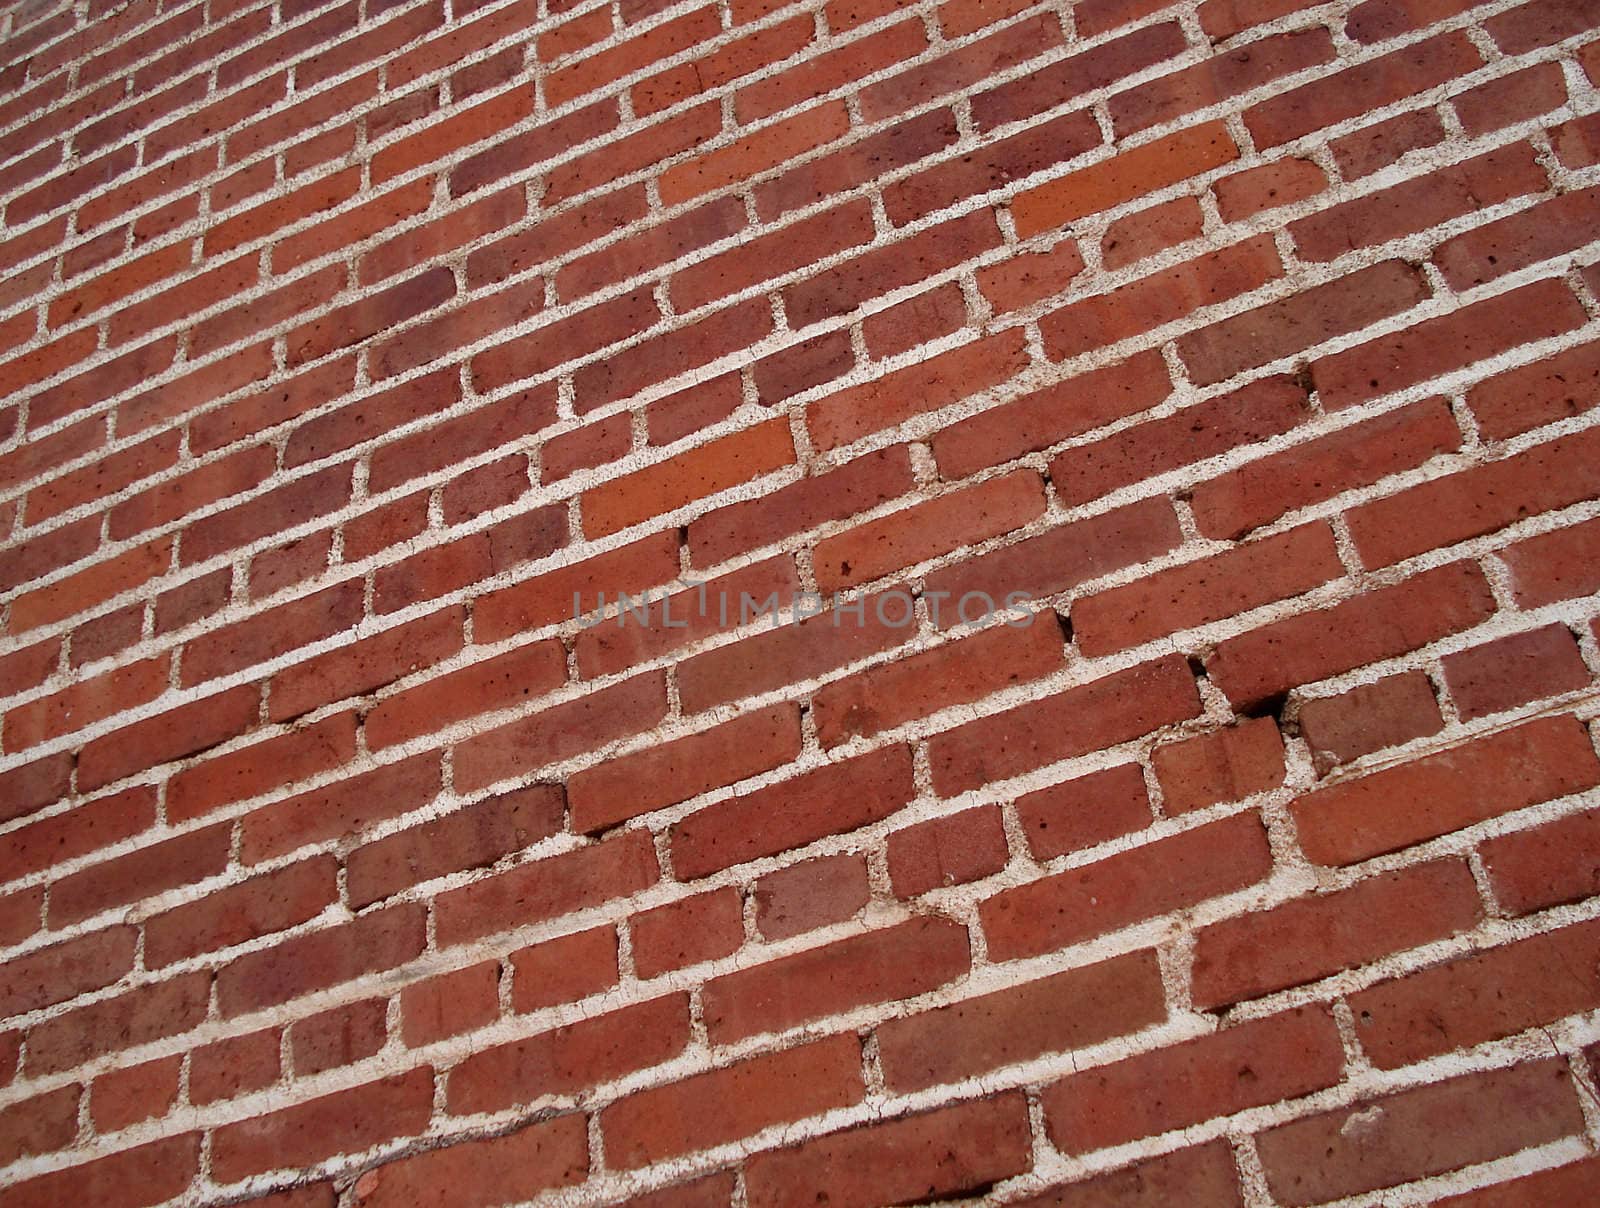 A red brick wall extends into the distance.